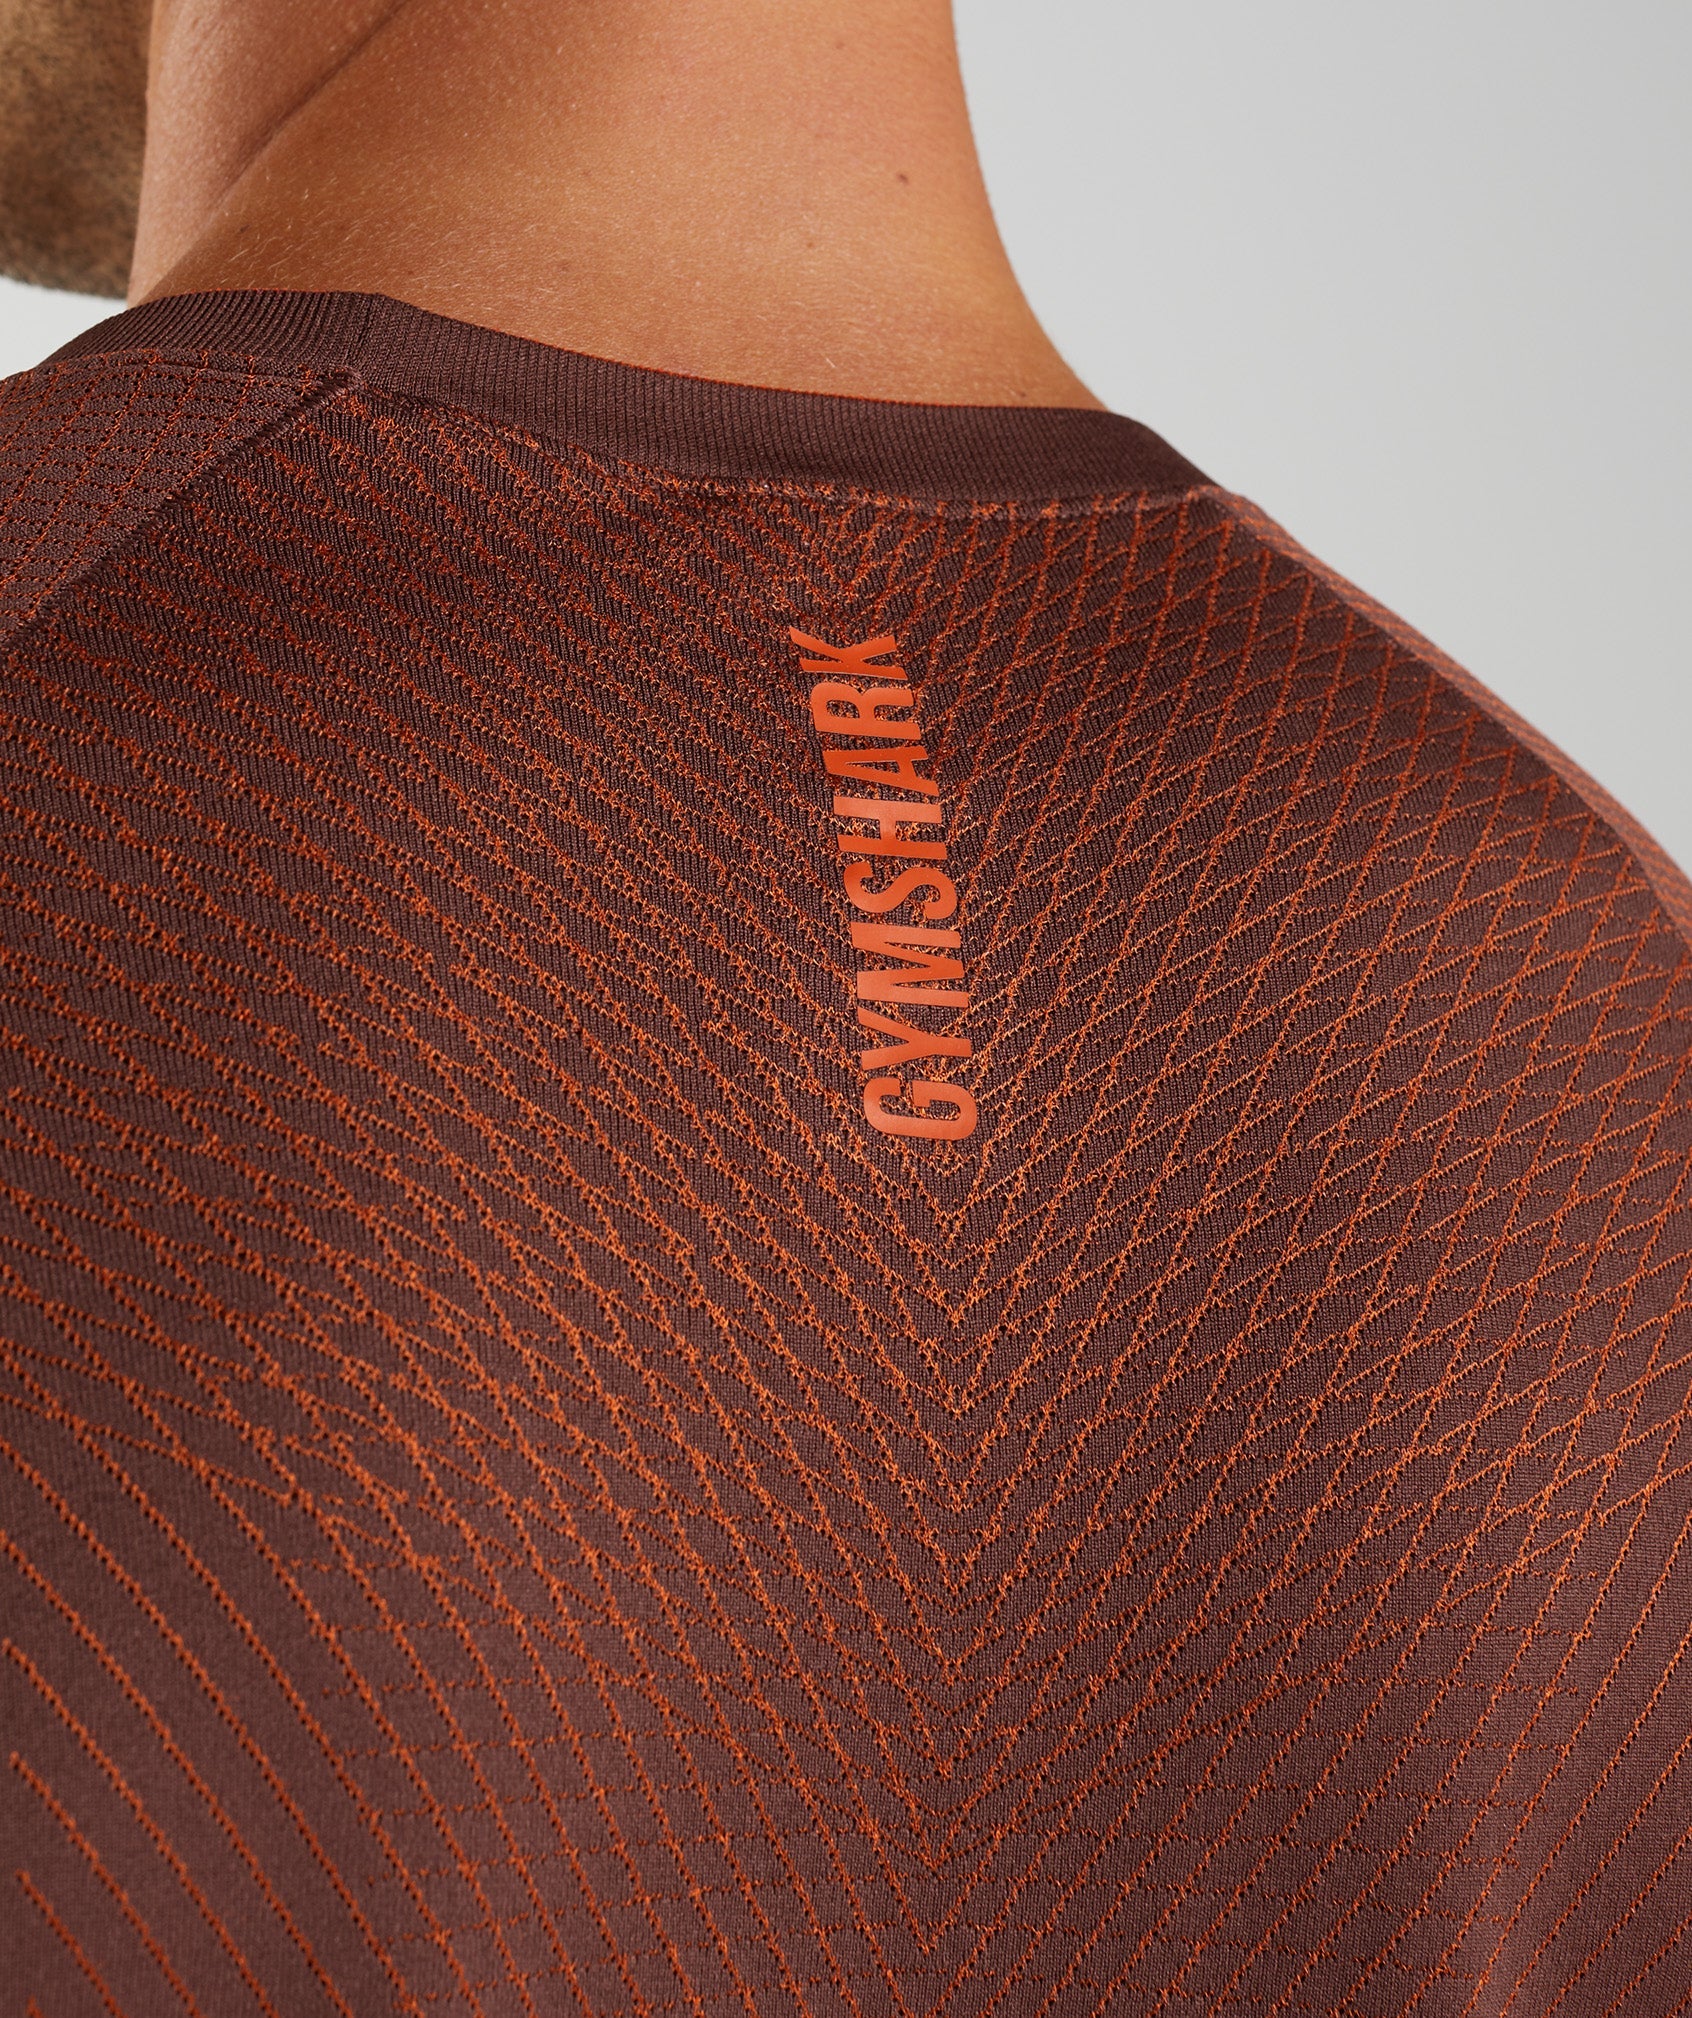 Apex Seamless Long Sleeve T-Shirt in Cherry Brown/Pepper Red - view 5